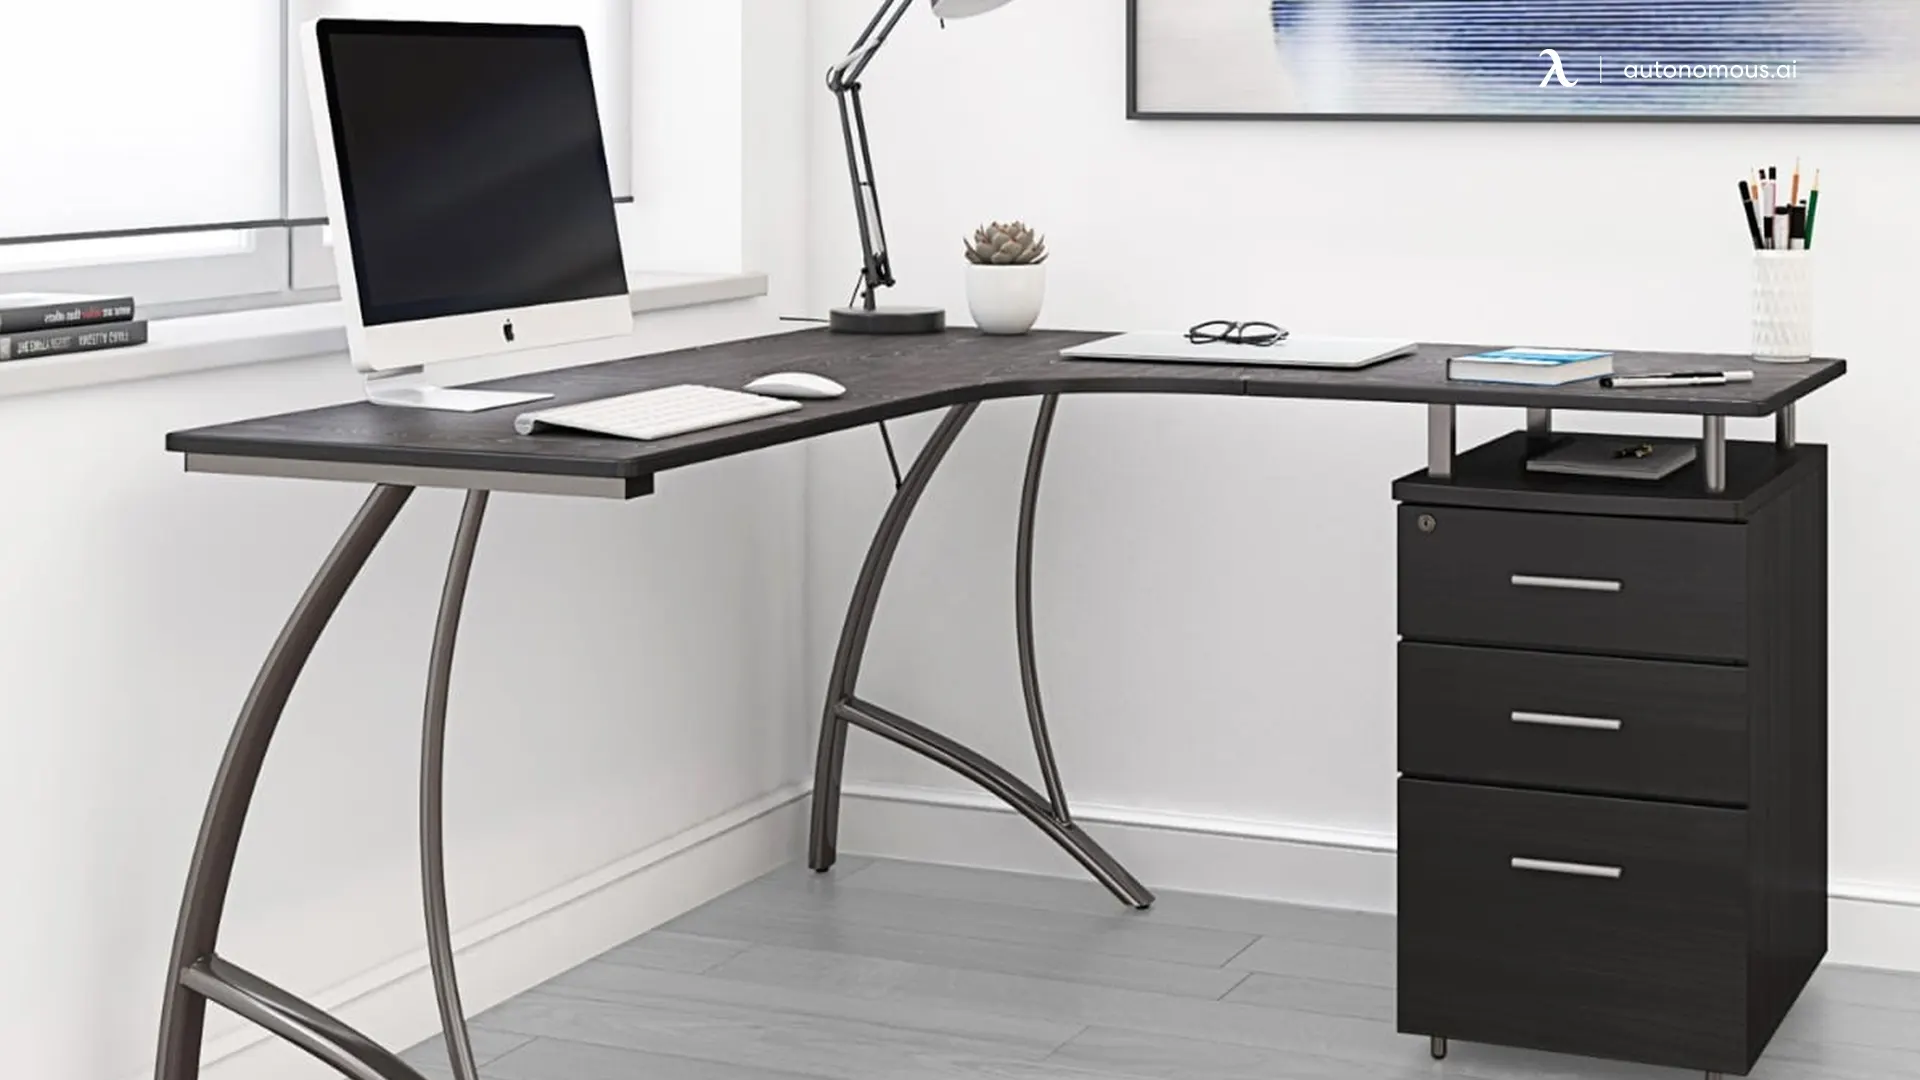 What Are The Benefits of a Computer Desk with Drawers?